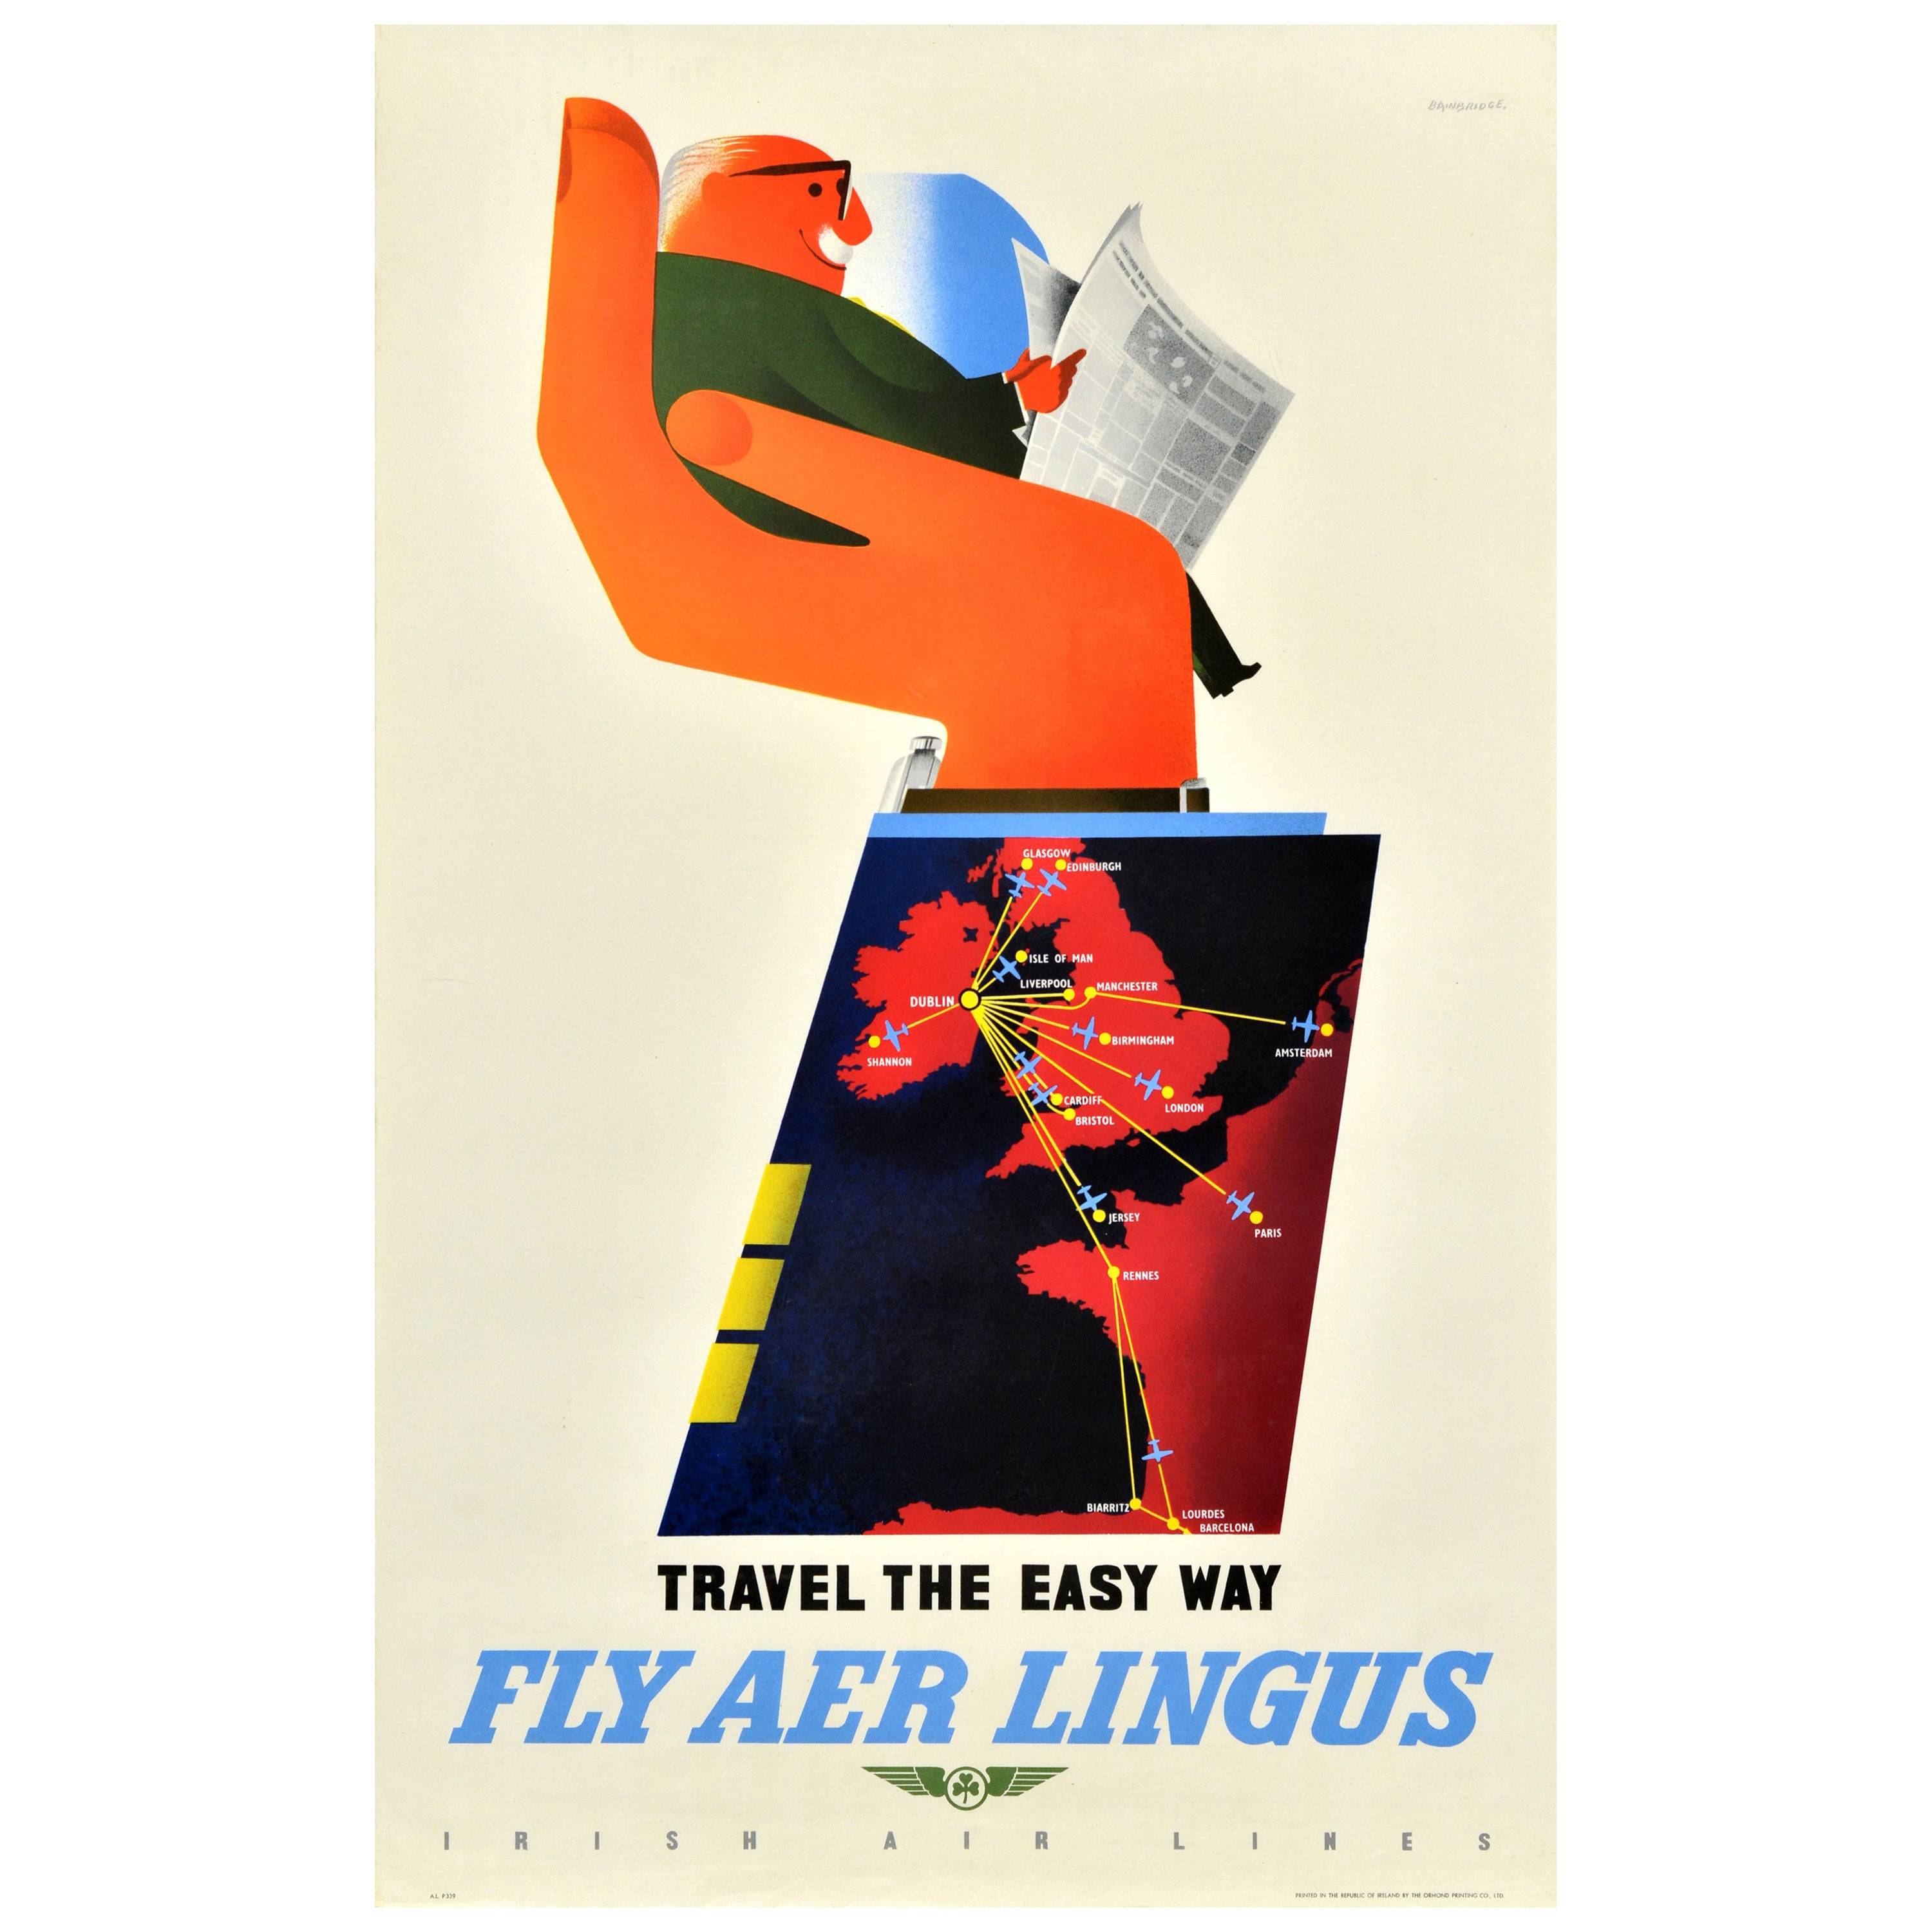 Original Vintage Travel Poster Fly Aer Lingus Travel The Easy Way Midcentury Art For Sale